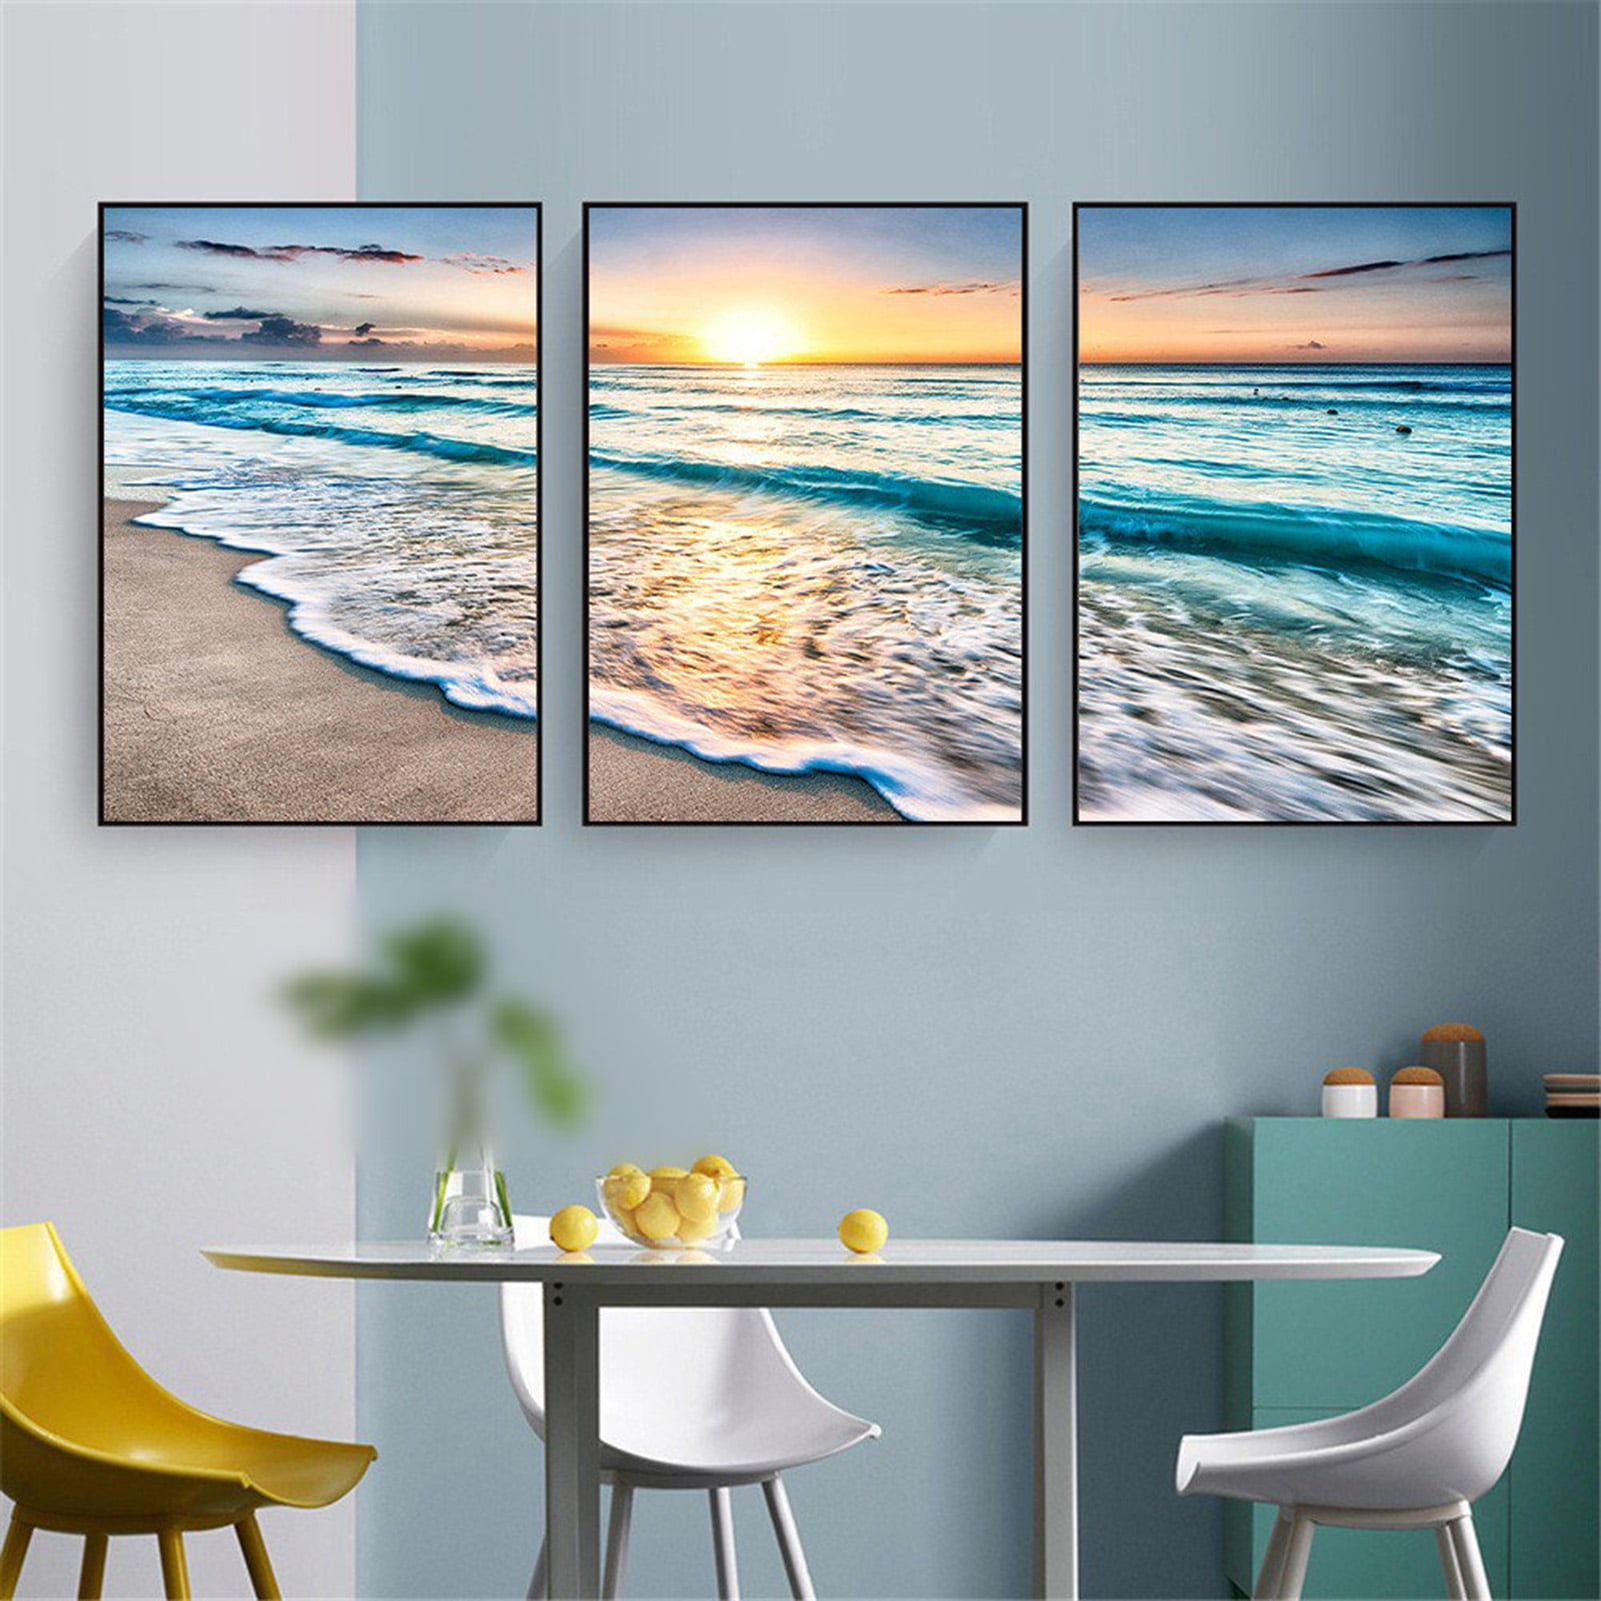 Details about   BEAUTIFUL CALIFORNIA BEACH PICTURE PRINT ON FRAMED CANVAS WALL ART DECORATION 